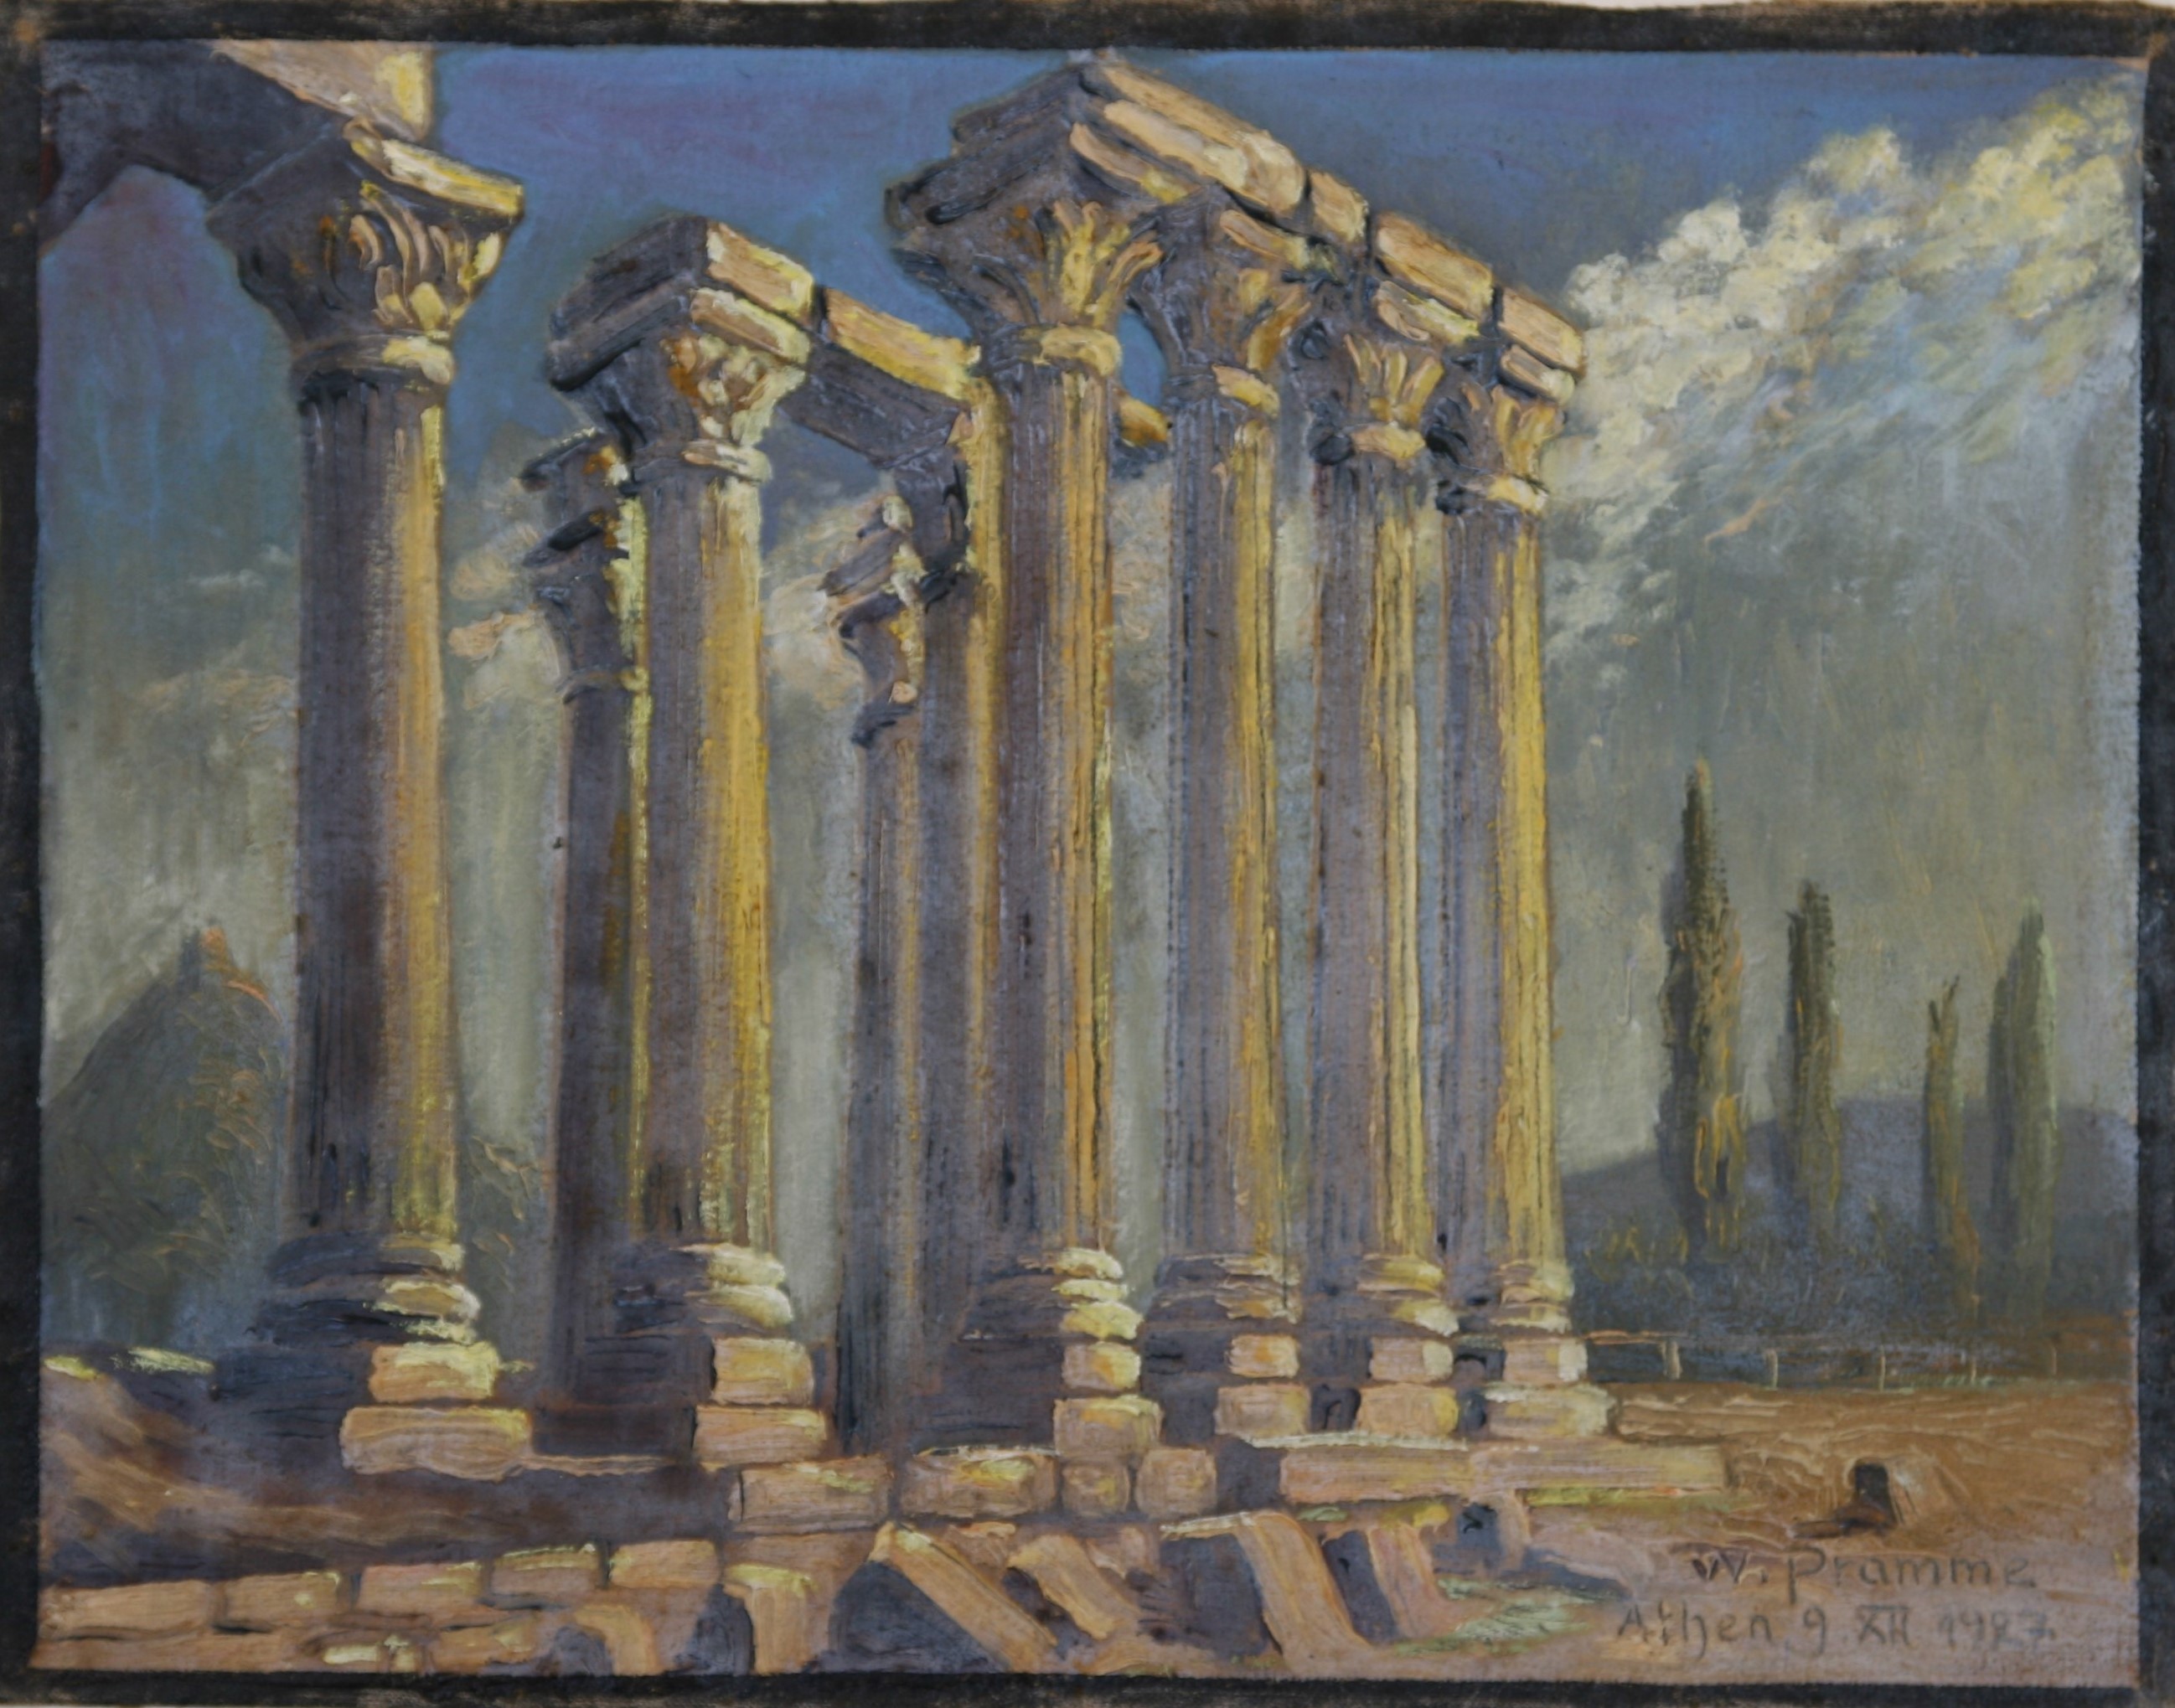 Zeus-Tempel in Athen, 9.12.1927 (Harzmuseum Wernigerode CC BY-NC-SA)